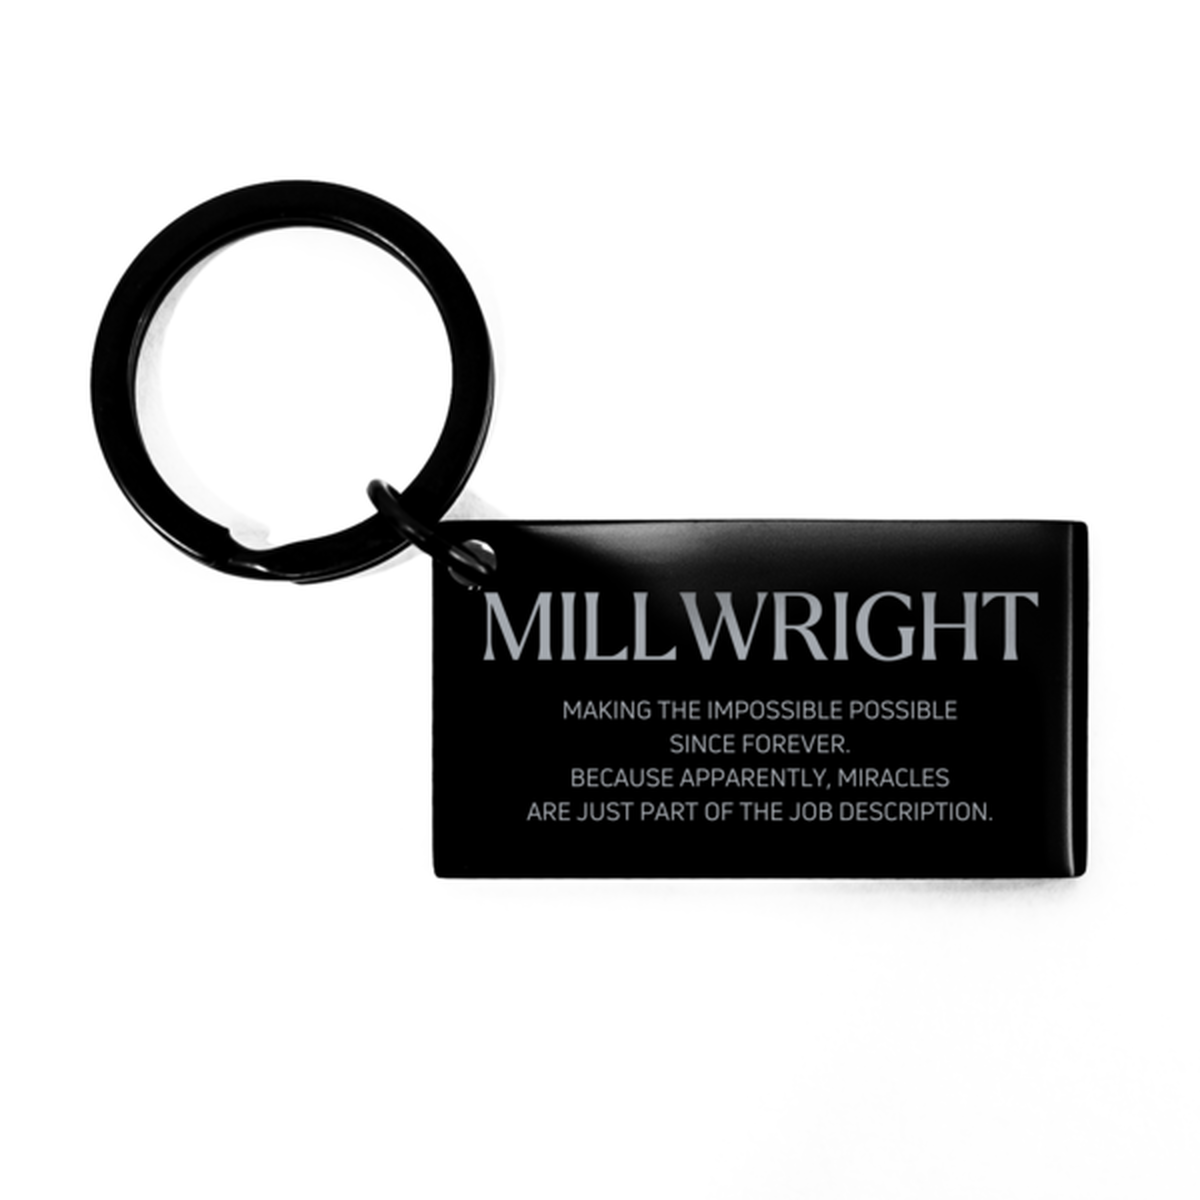 Funny Millwright Gifts, Miracles are just part of the job description, Inspirational Birthday Keychain For Millwright, Men, Women, Coworkers, Friends, Boss